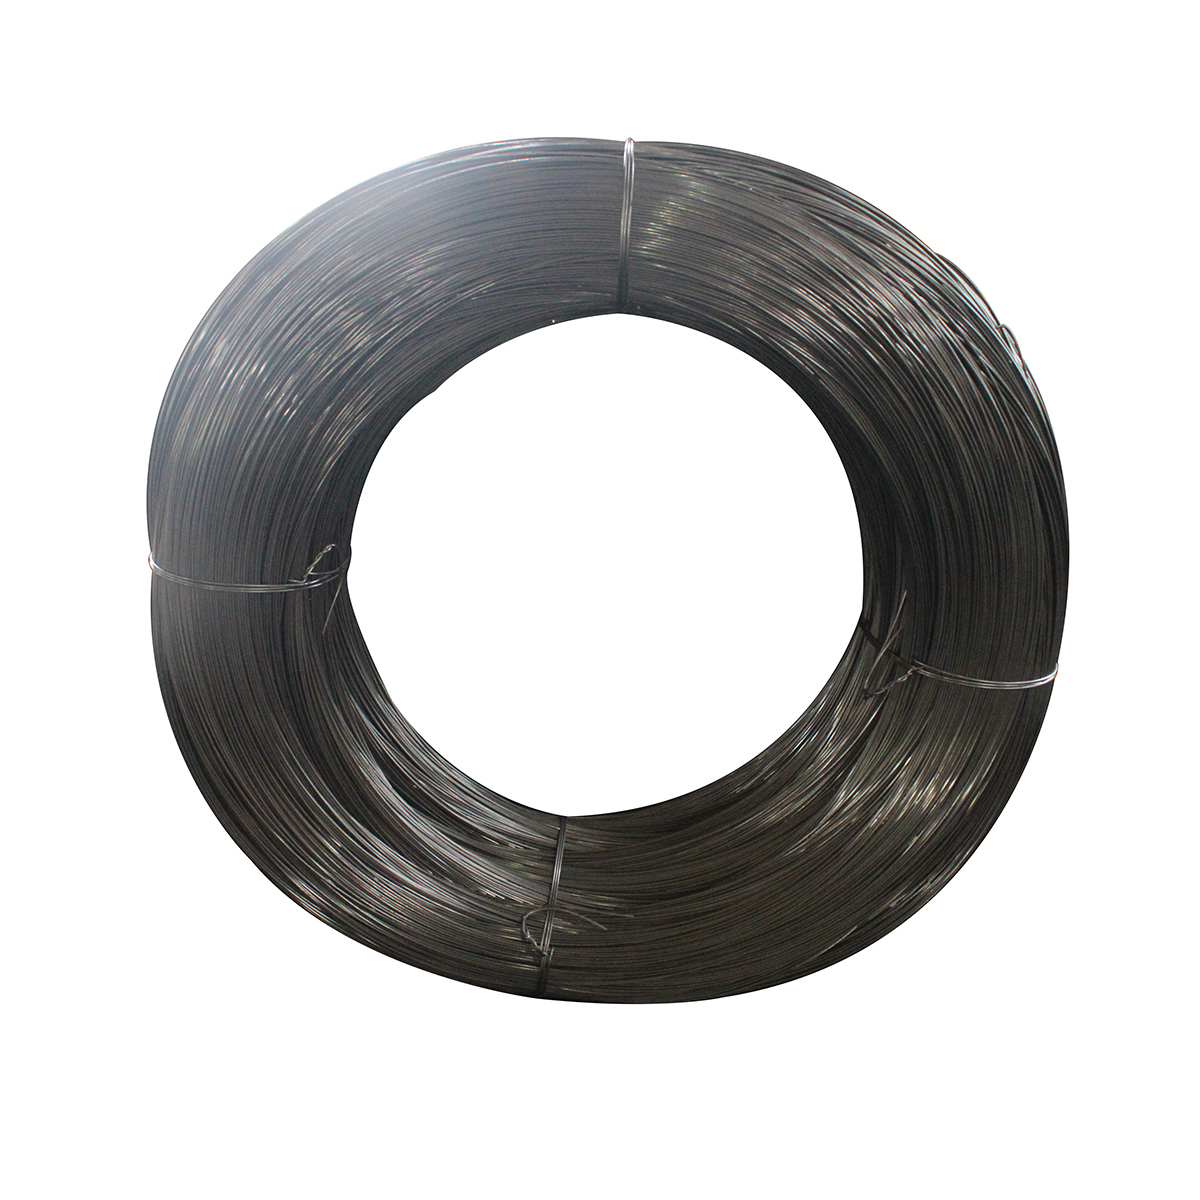 72A High carbon steel wire